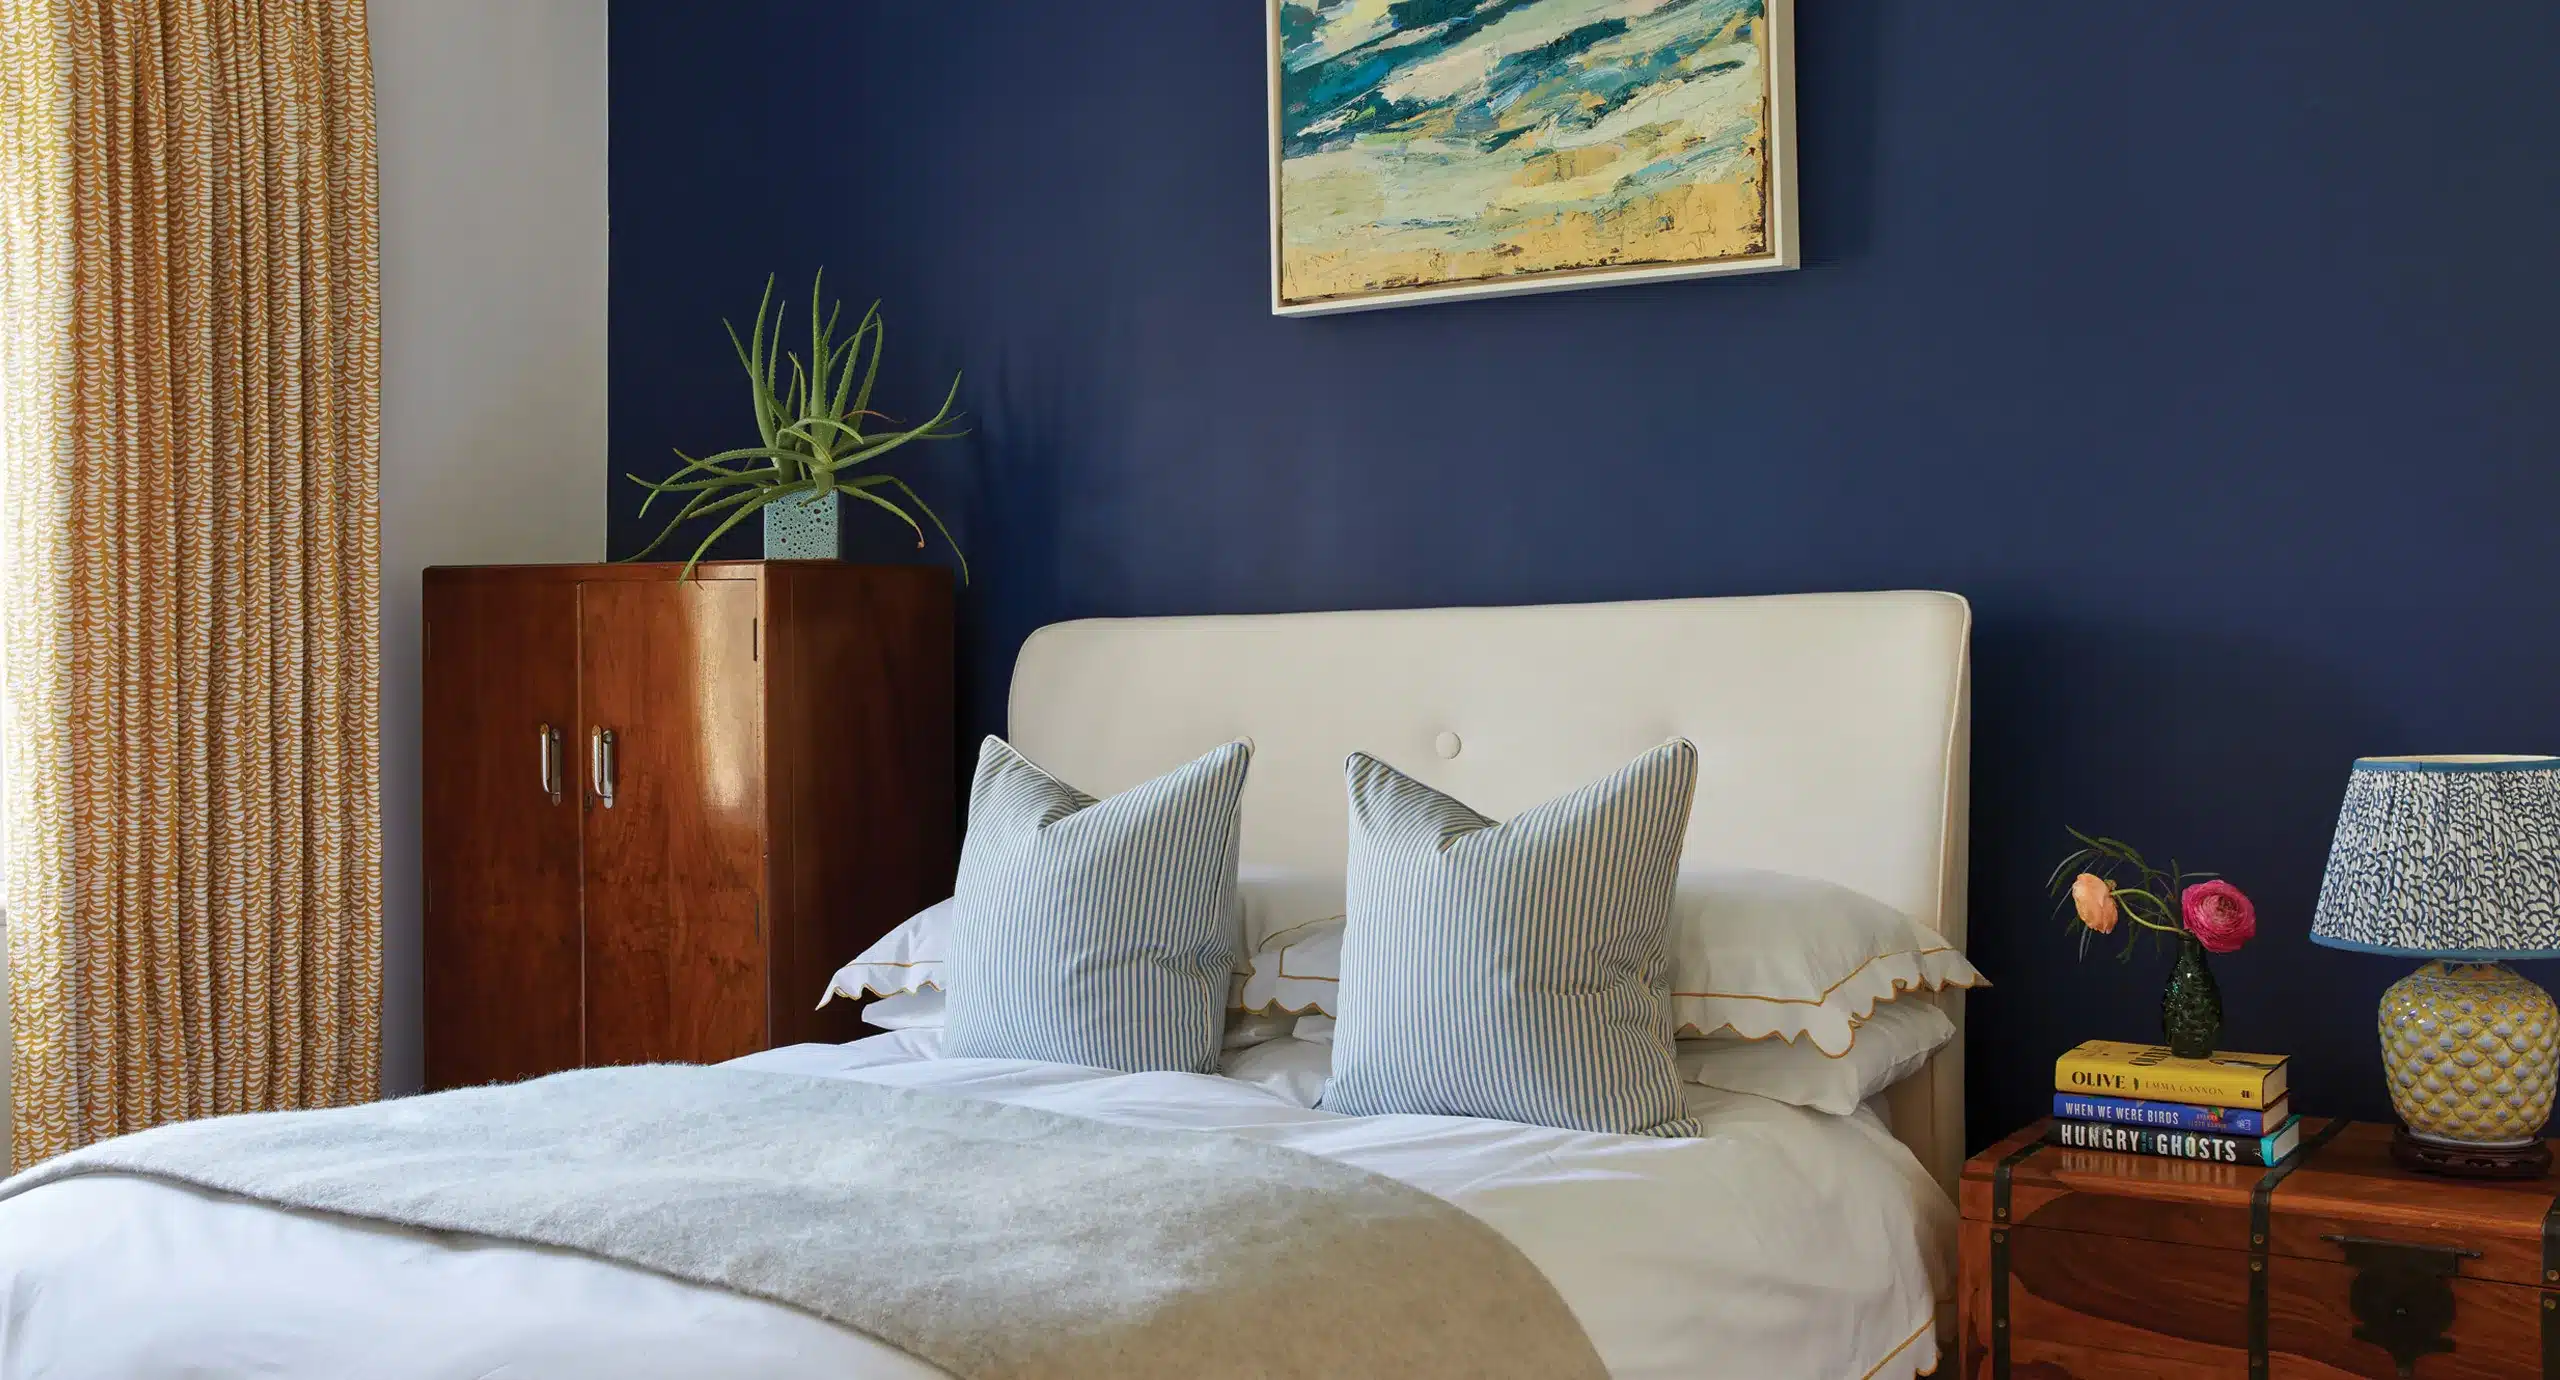 A bedroom with blue walls and white furniture is enhanced by custom-made curtains and blinds.